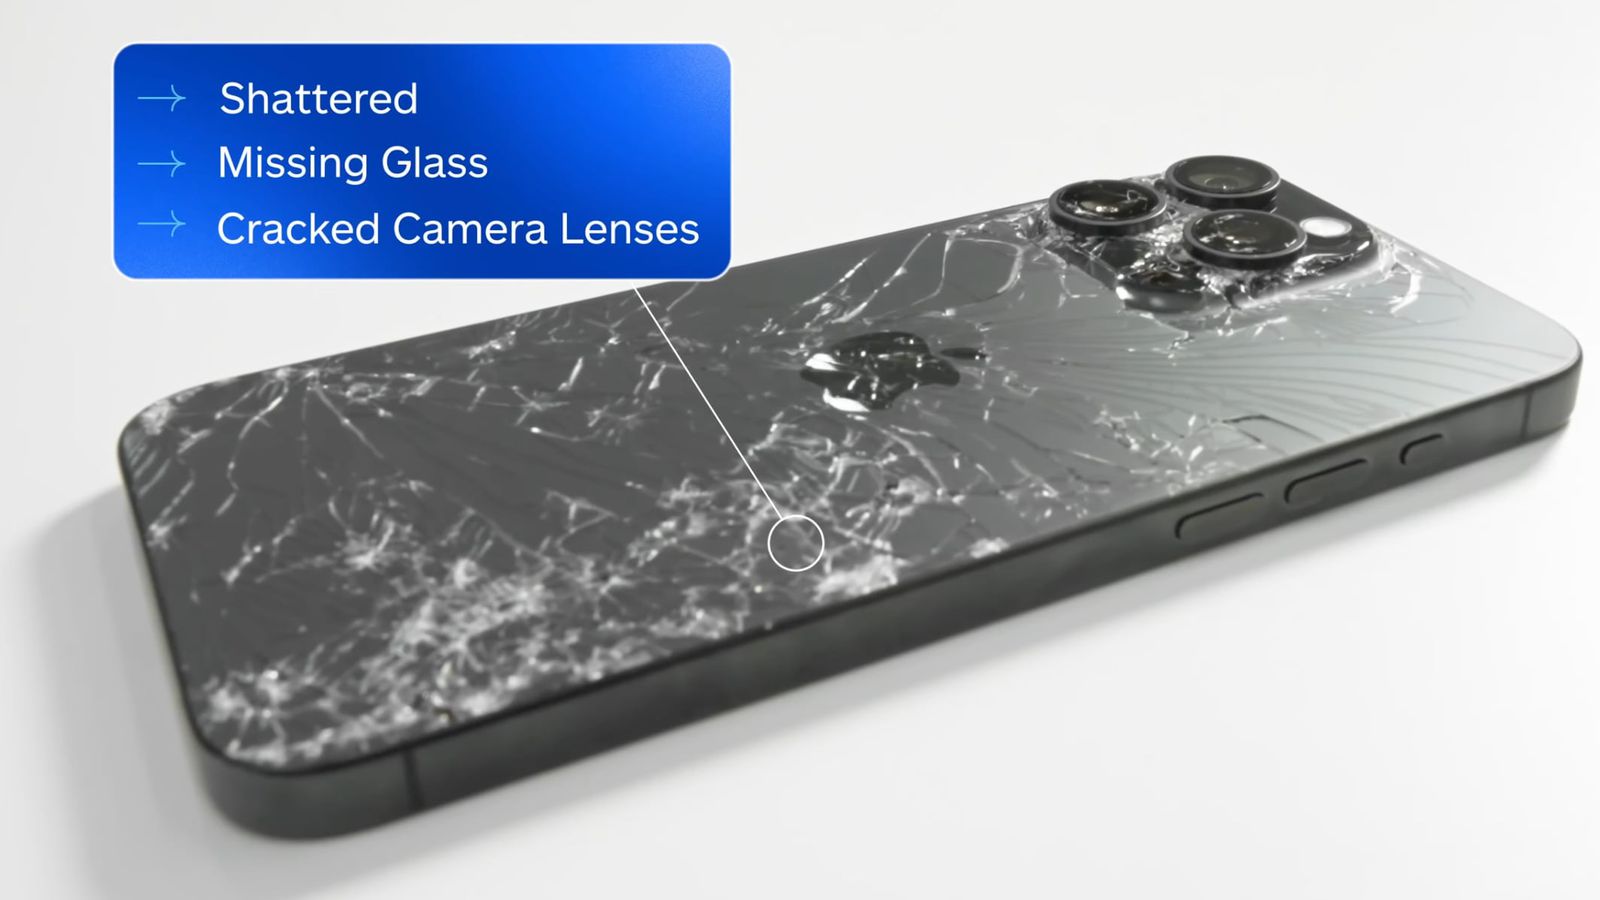 iPhone 15 Pro Max back glass cracks within seconds in new